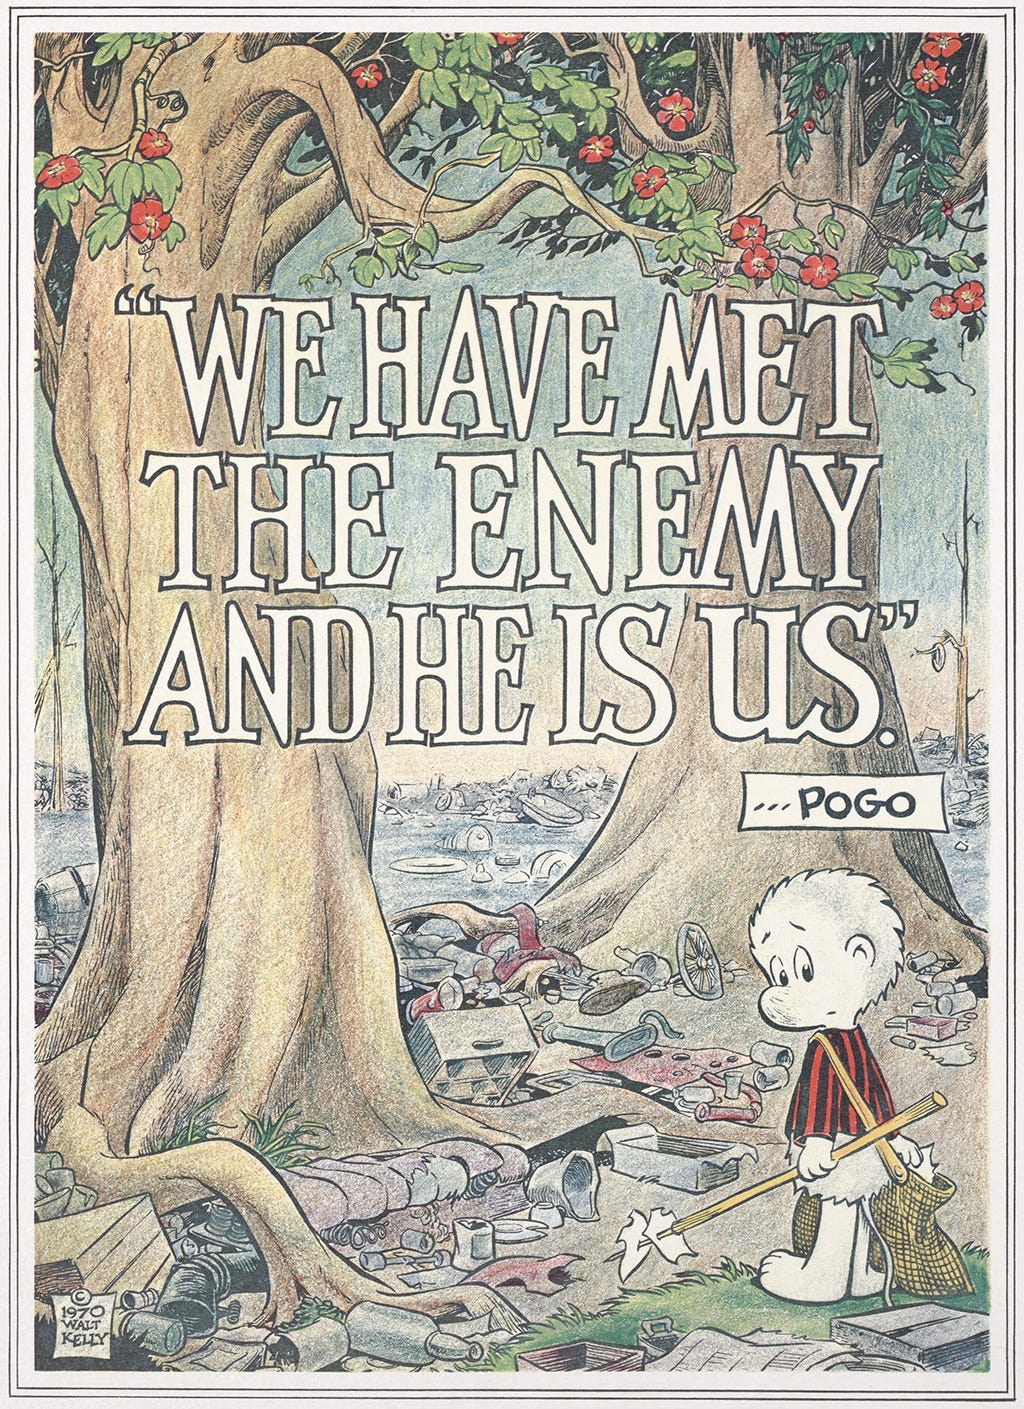 Caption: "We have met the enemy and he is us."